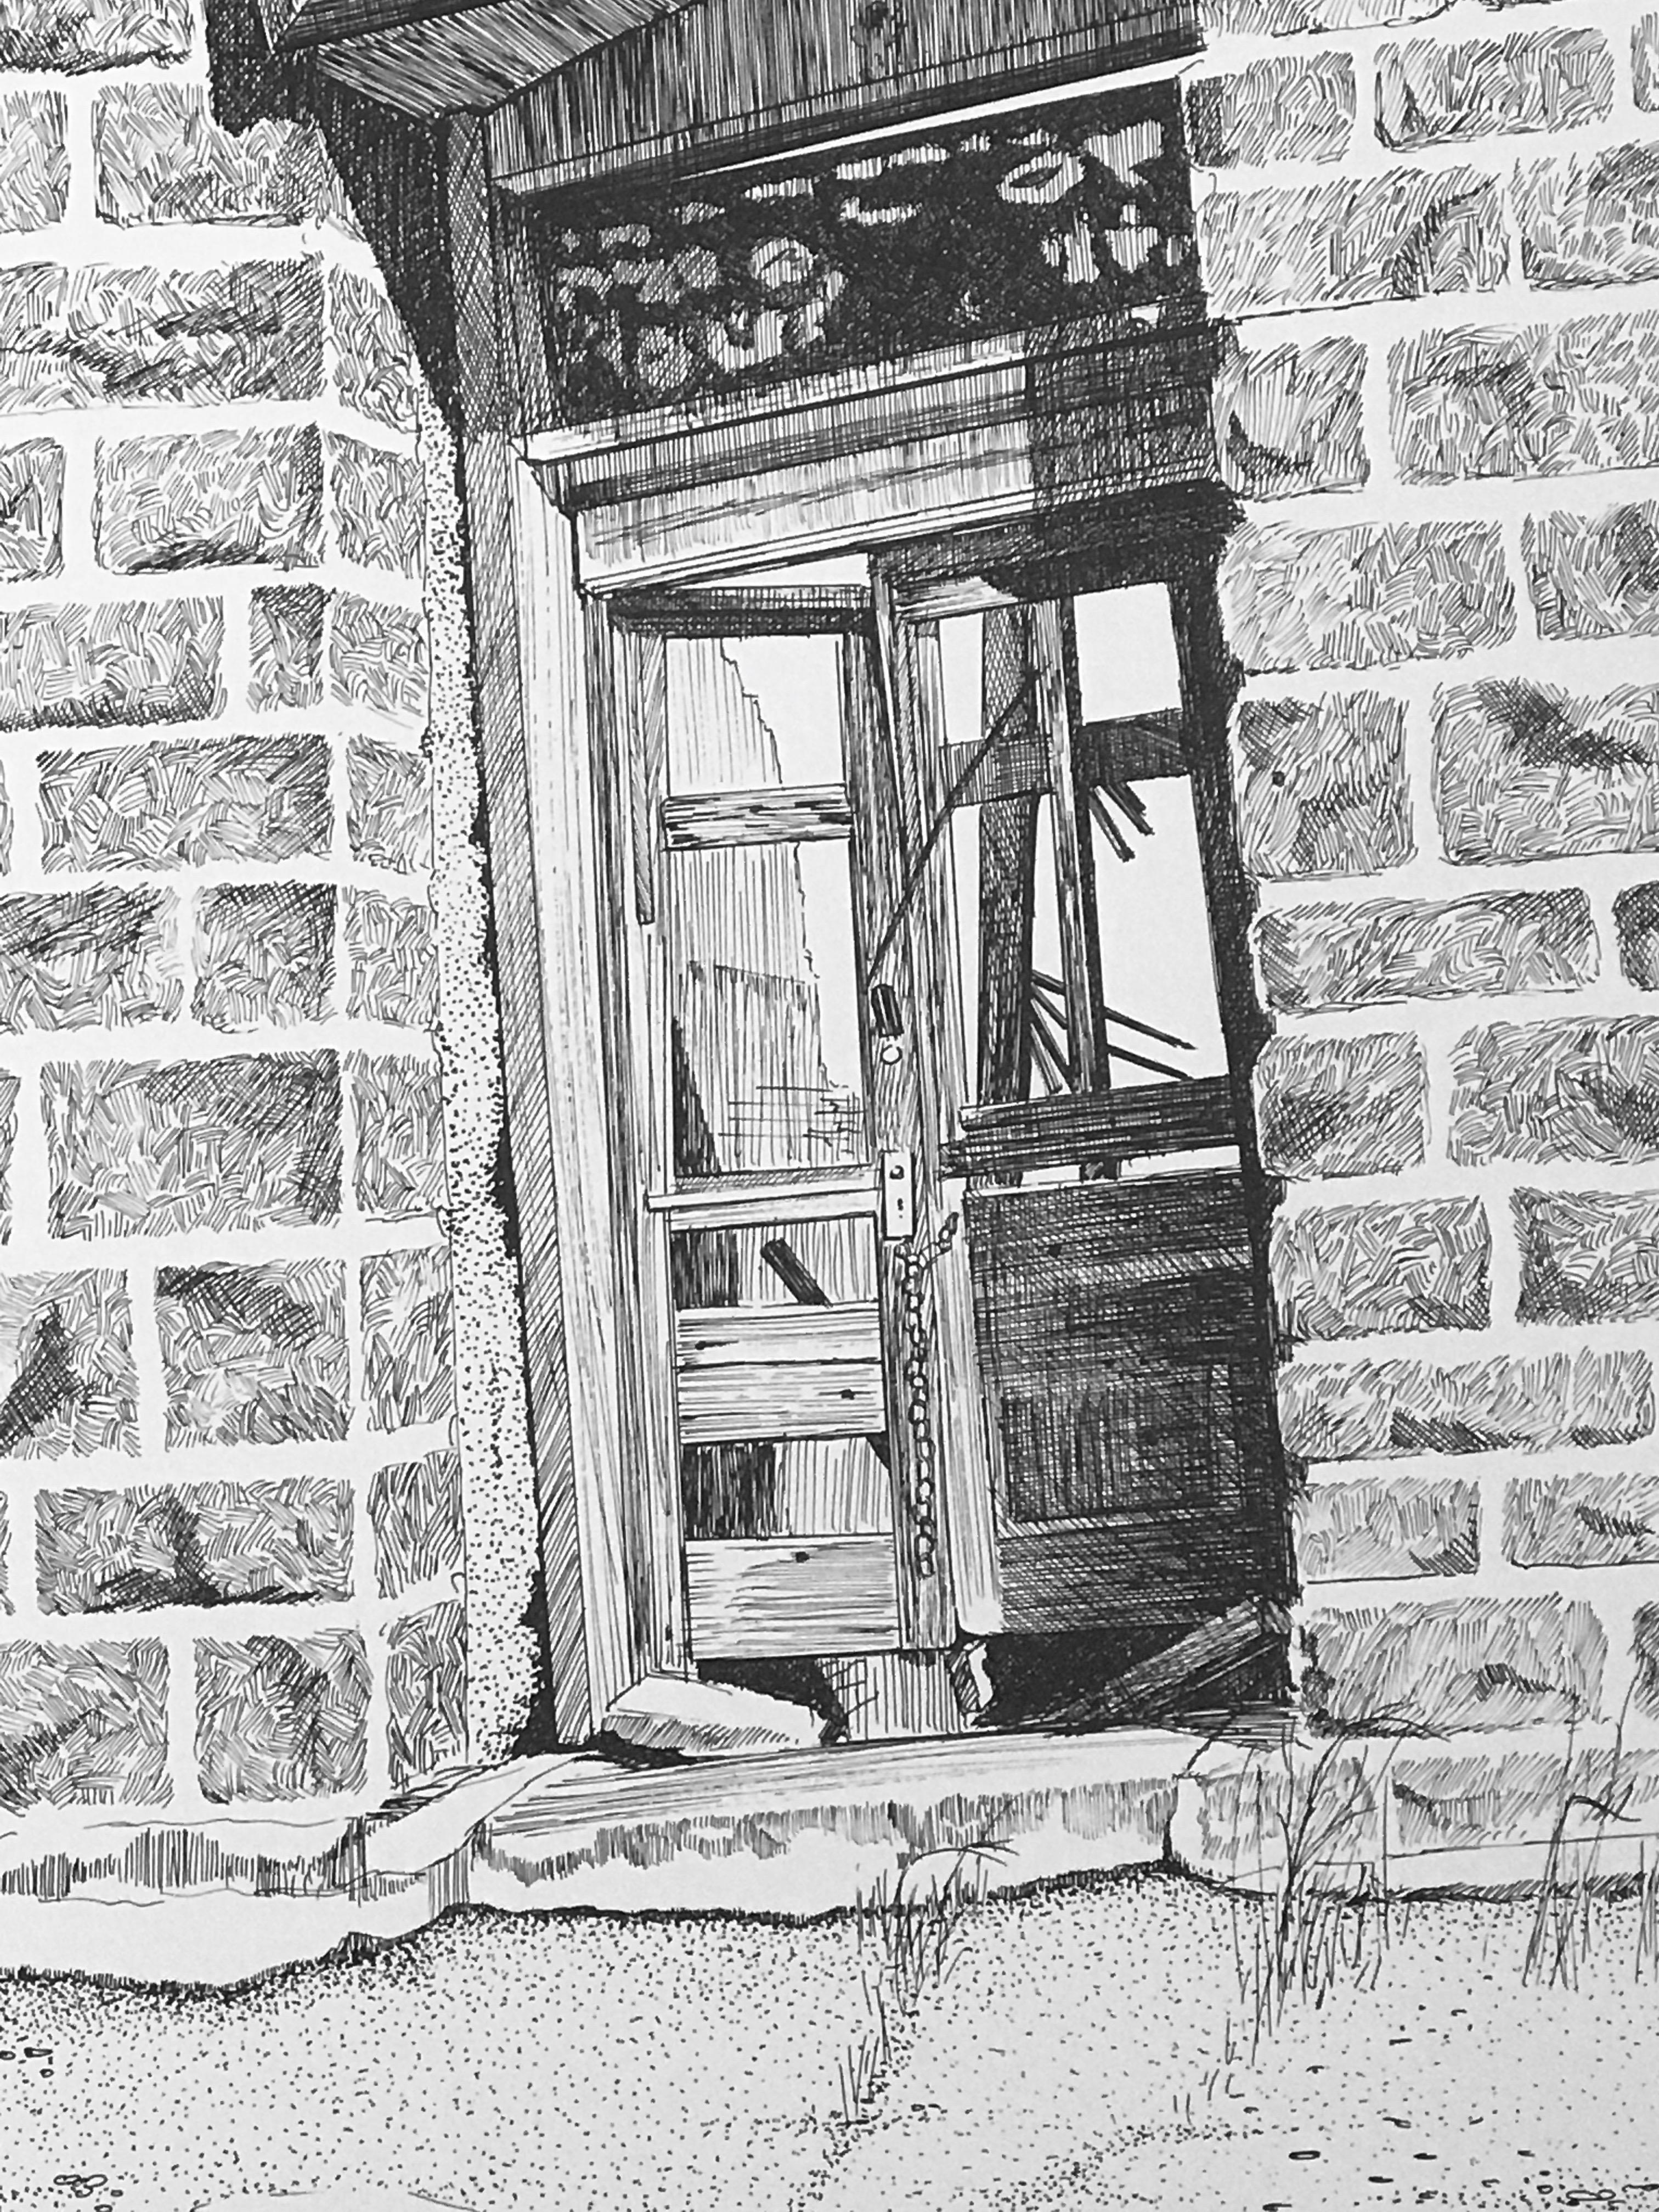 The Doorway by John Fitzgerald, Jerome Old West Arizona Coca Cola sign print - Print by John T. Fitzgerald